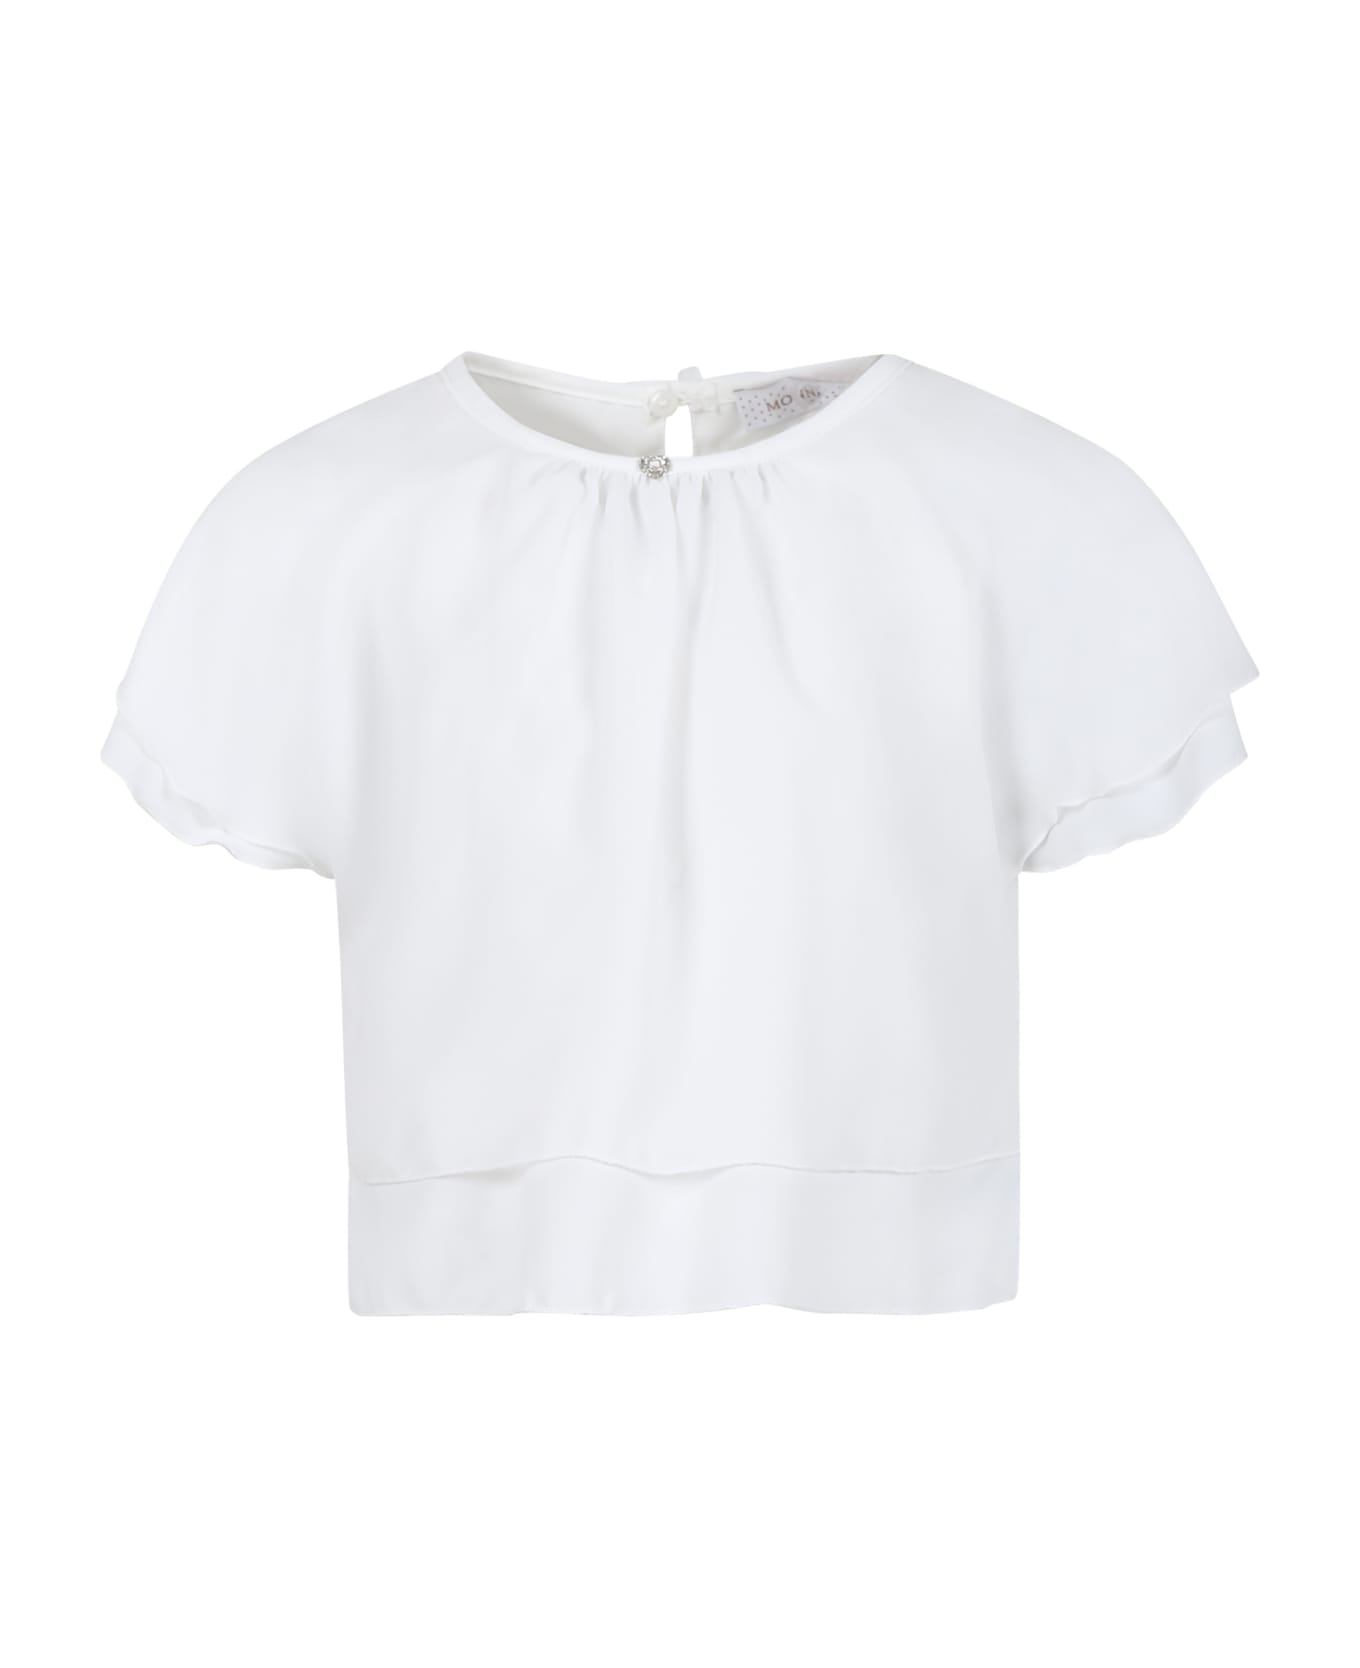 Monnalisa White Top For Girl With Bows - Panna トップス